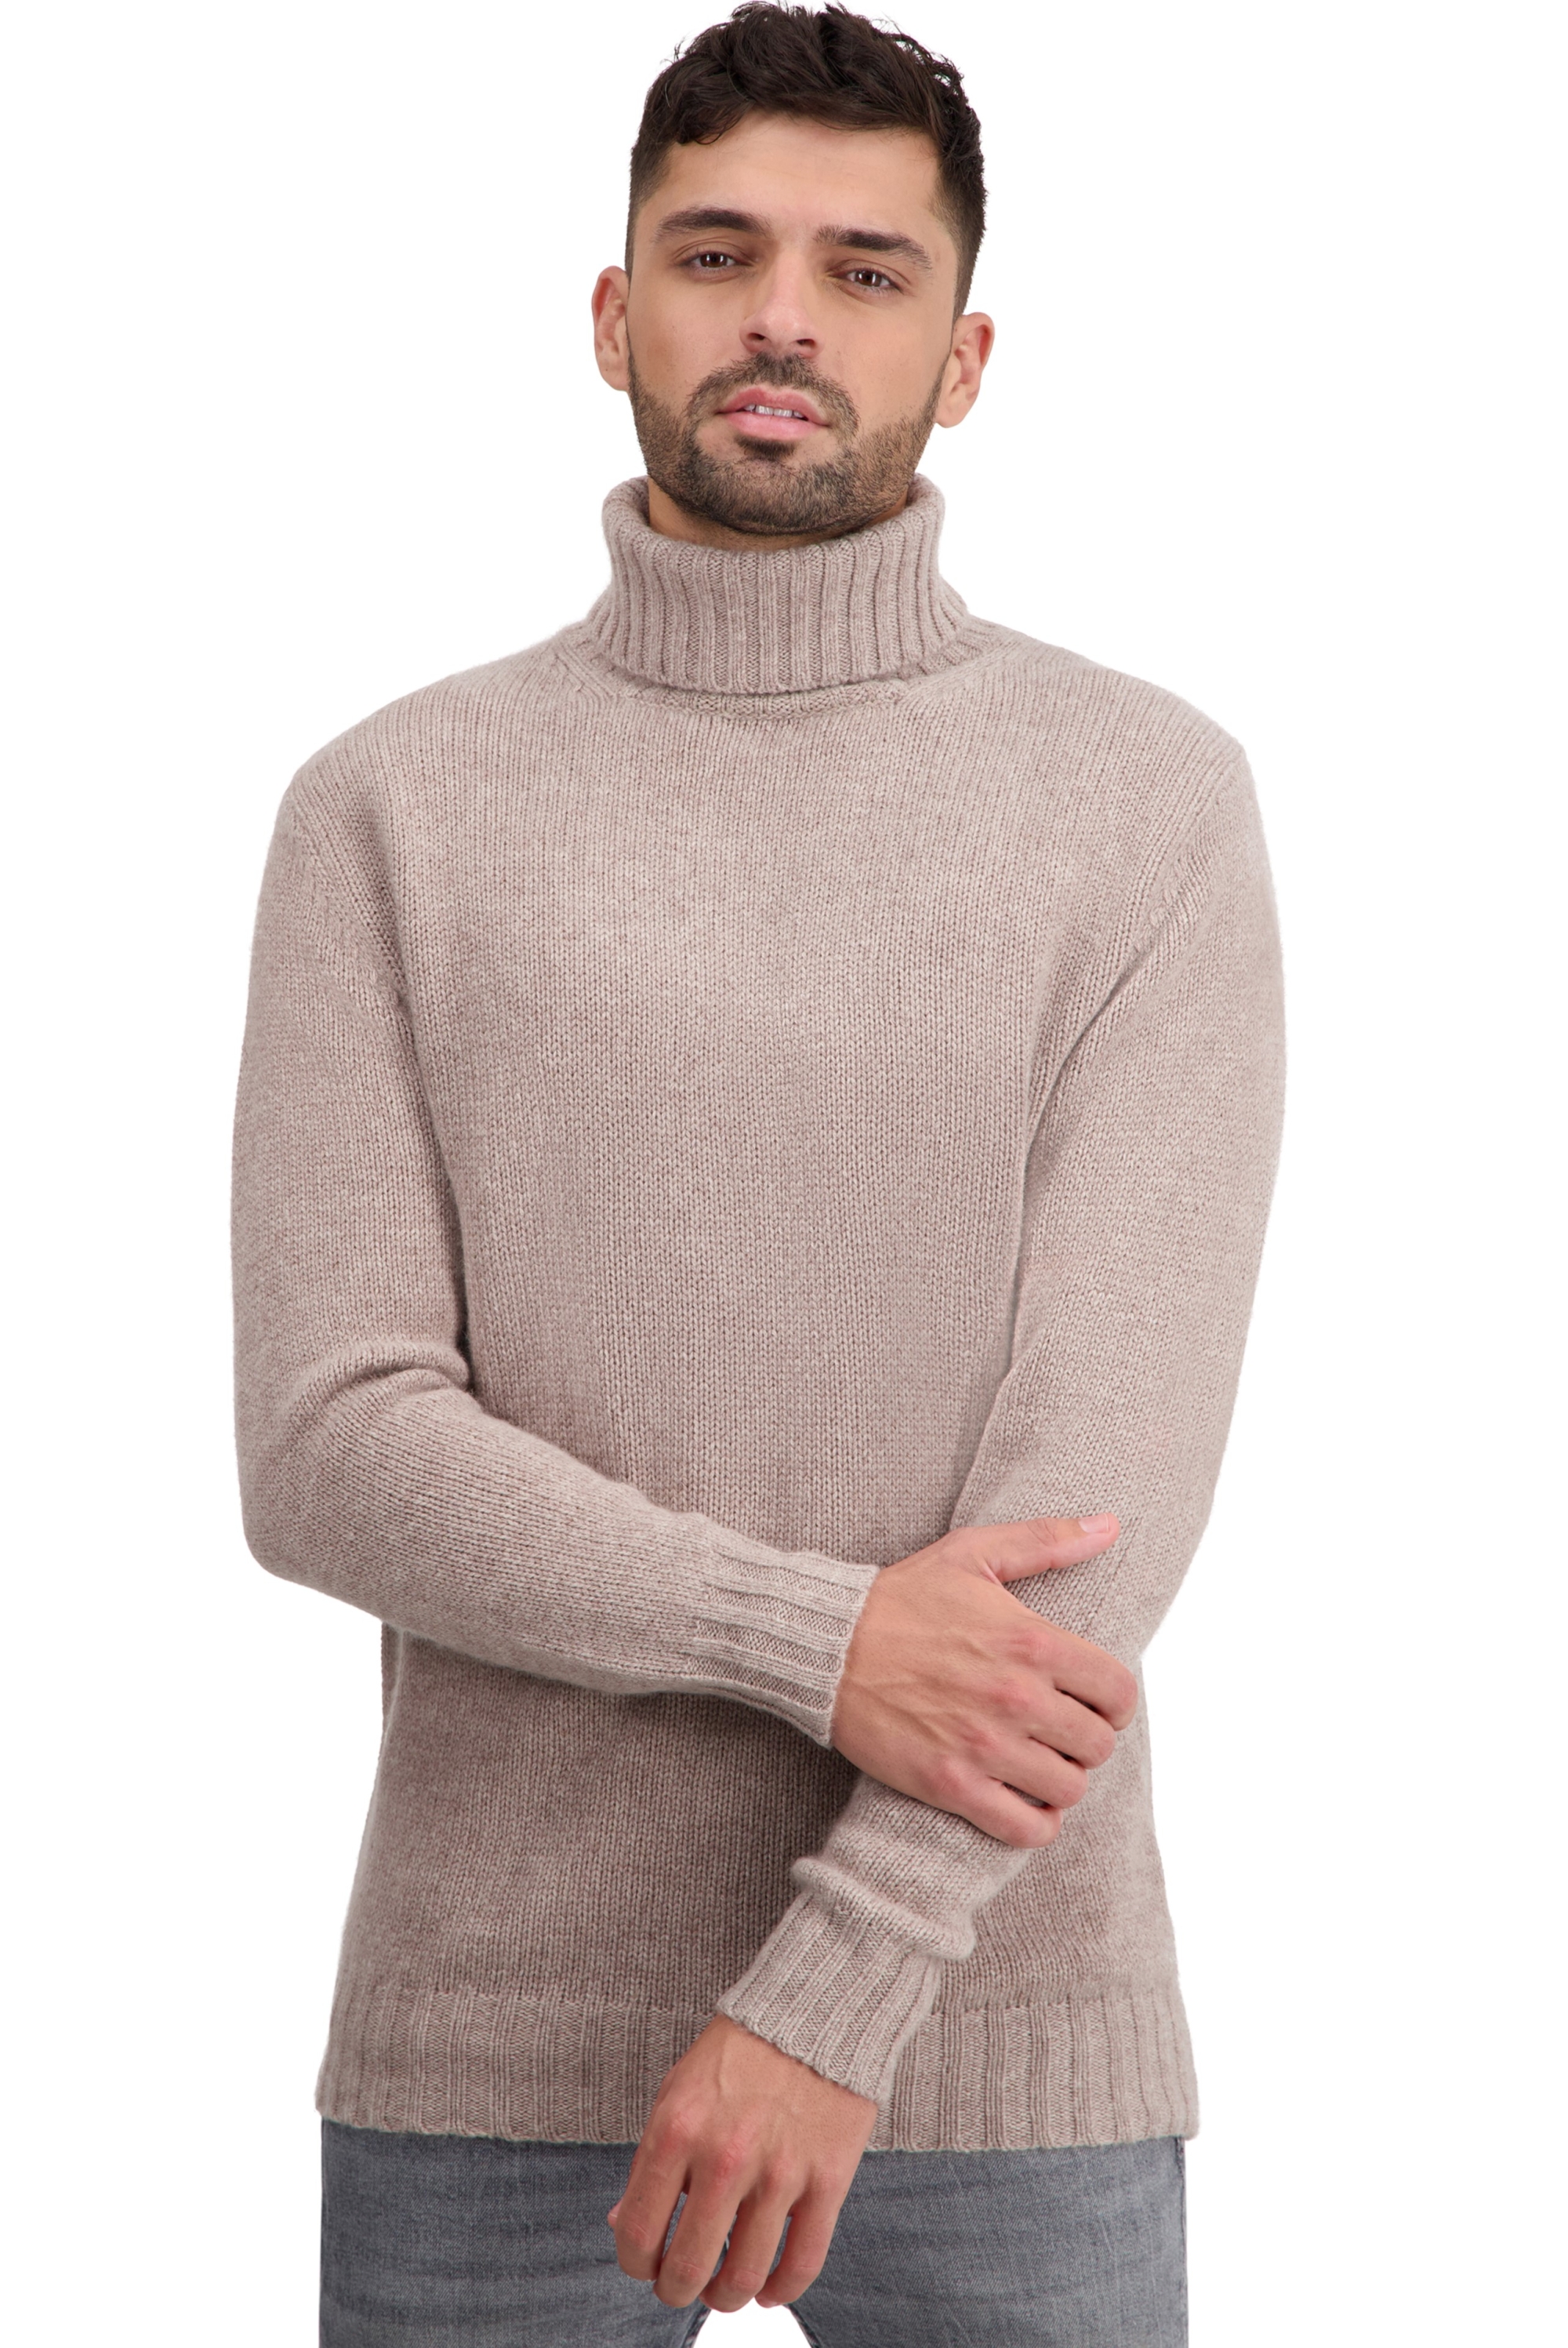 Cashmere men basic sweaters at low prices tobago first toast s